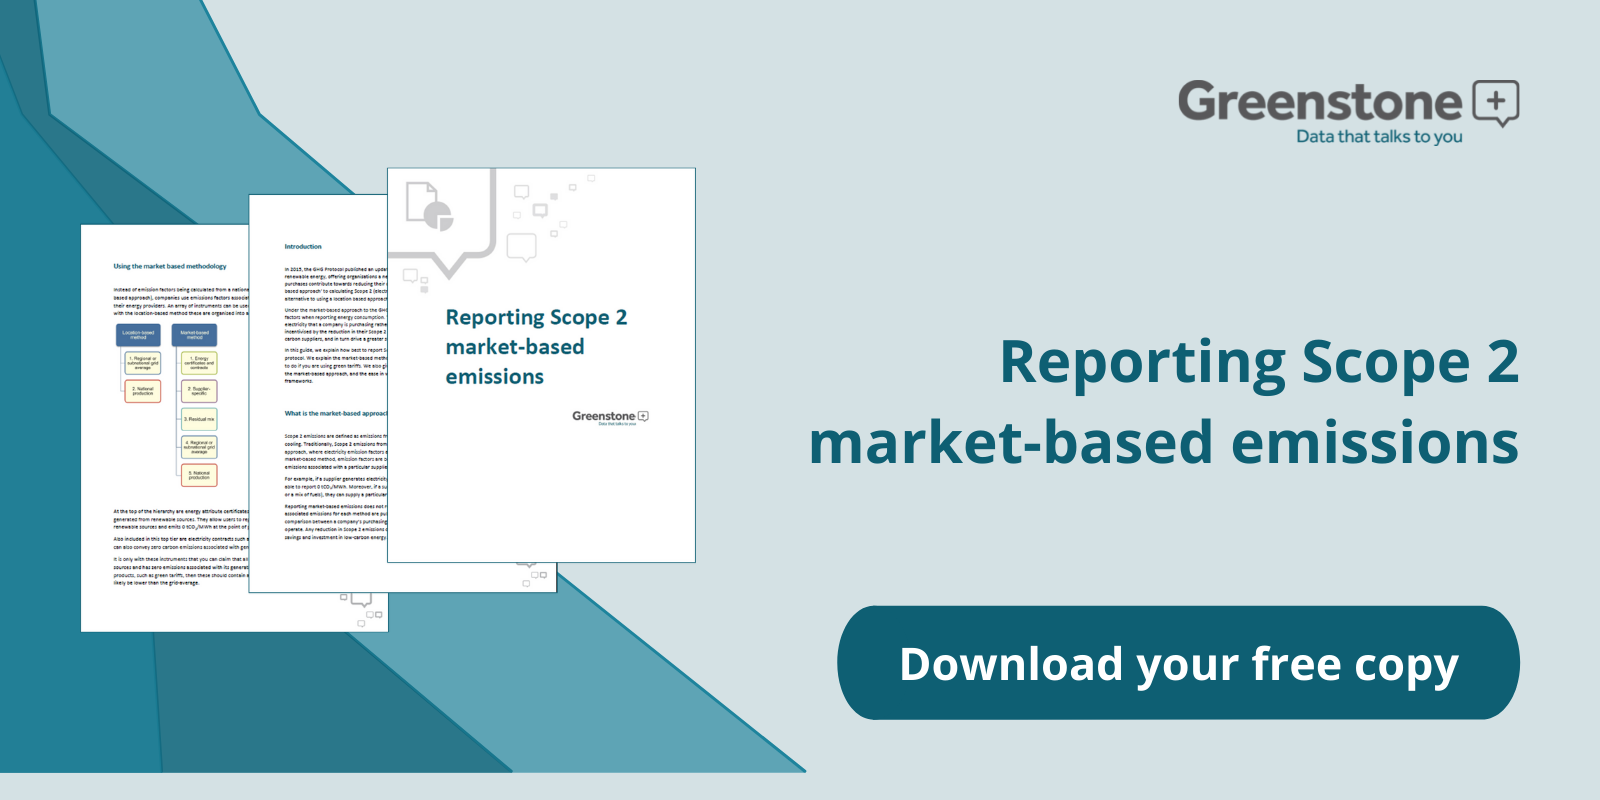 Reporting Scope 2 market-based emissions guide